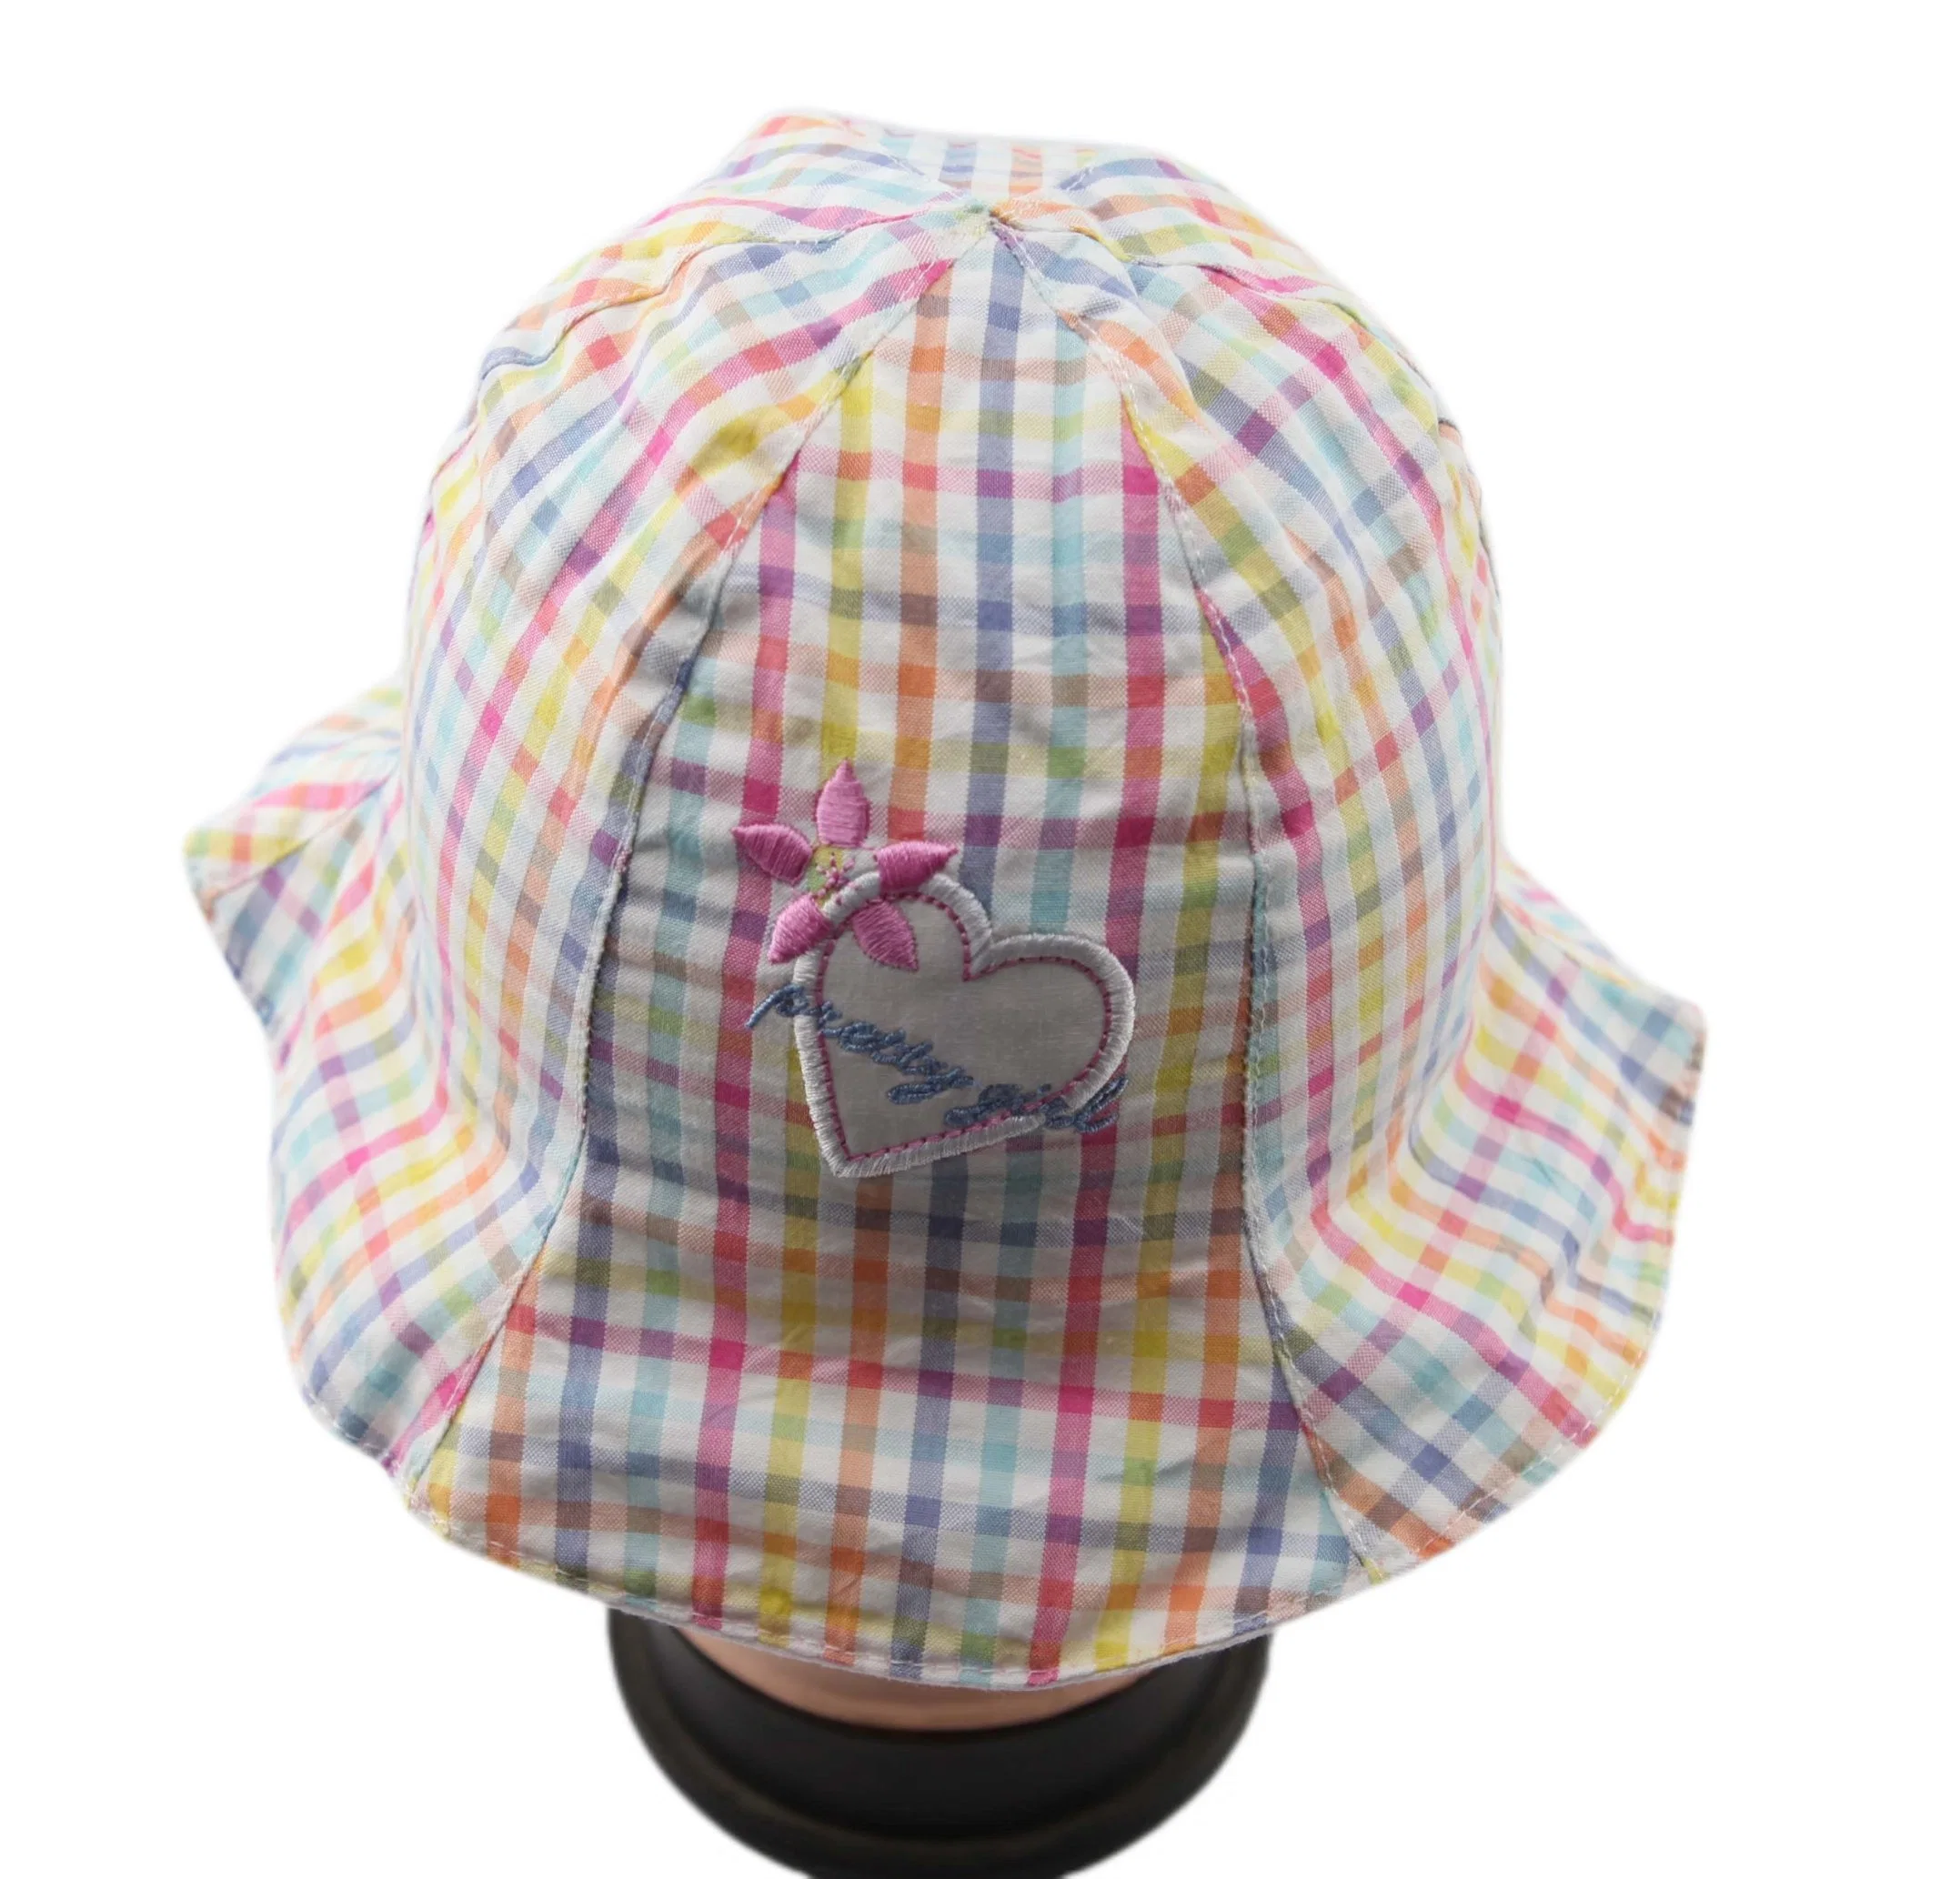 Kids Bucket Hat with Printing and Embroidery Polyester Foldable Soft Summer Fashion Cap for Girls